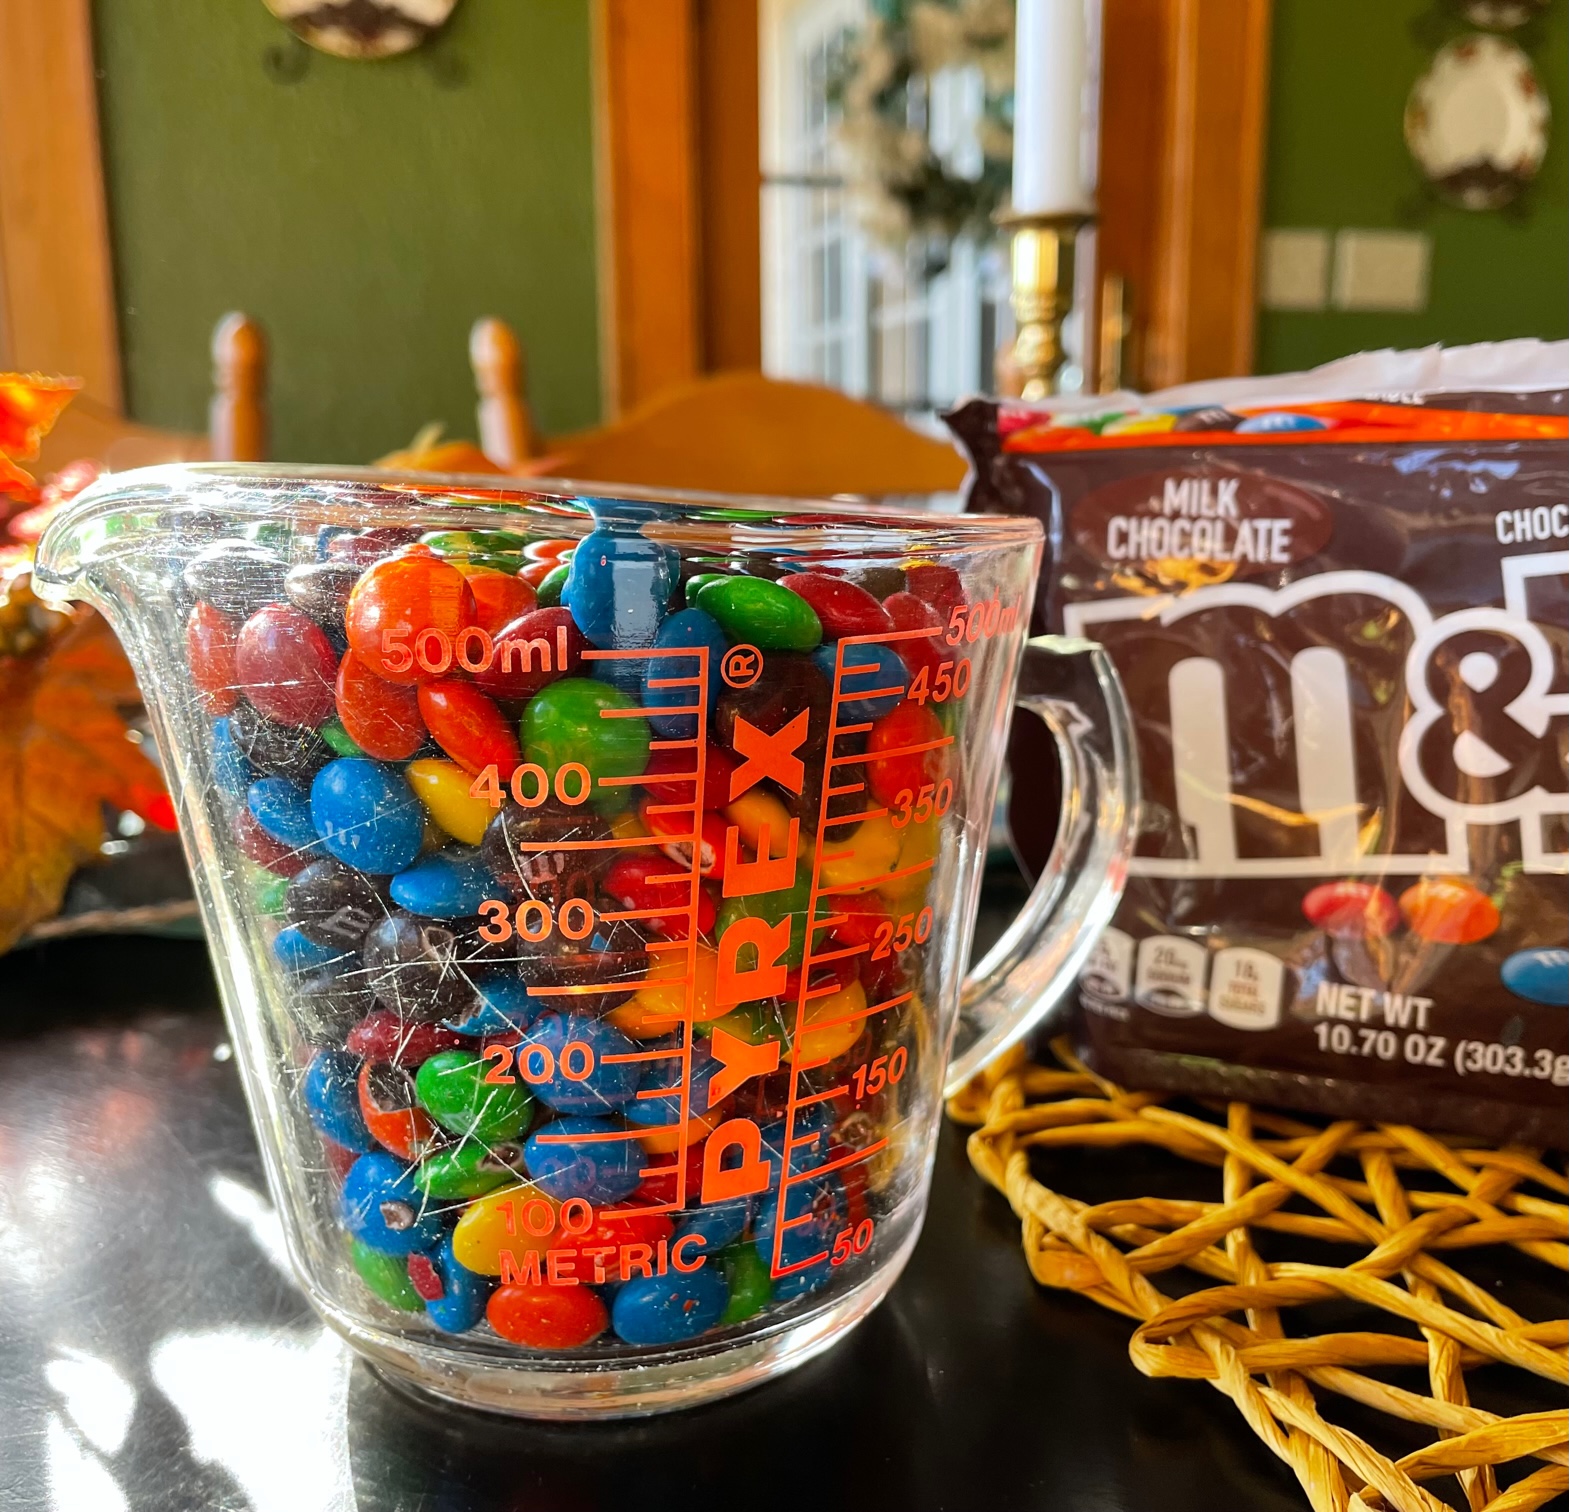 Trident Tech - Downtown: Take Your Best Guess! How Many M&M's are in the  Jar?